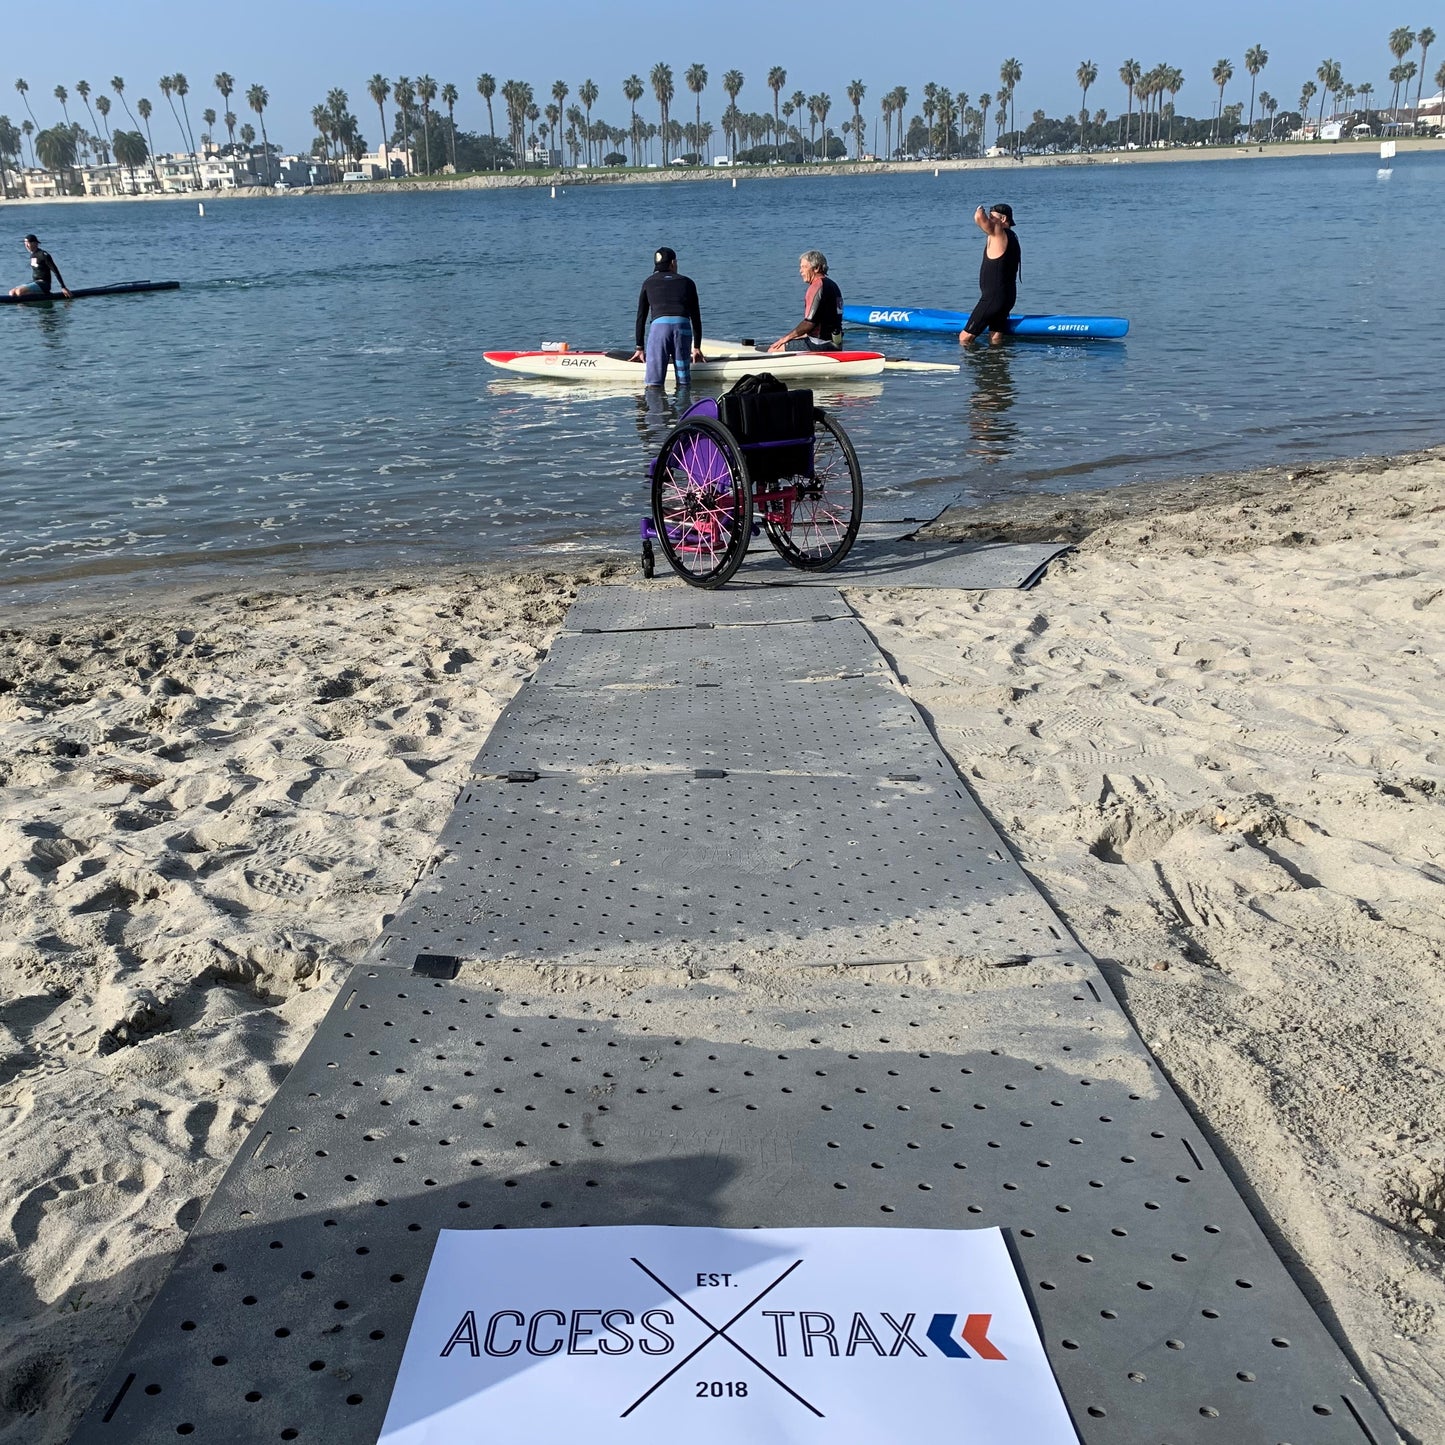 AccessTrax being used on the beach with canoes in the lake and a manual wheelchair at the end of the AccessTrax